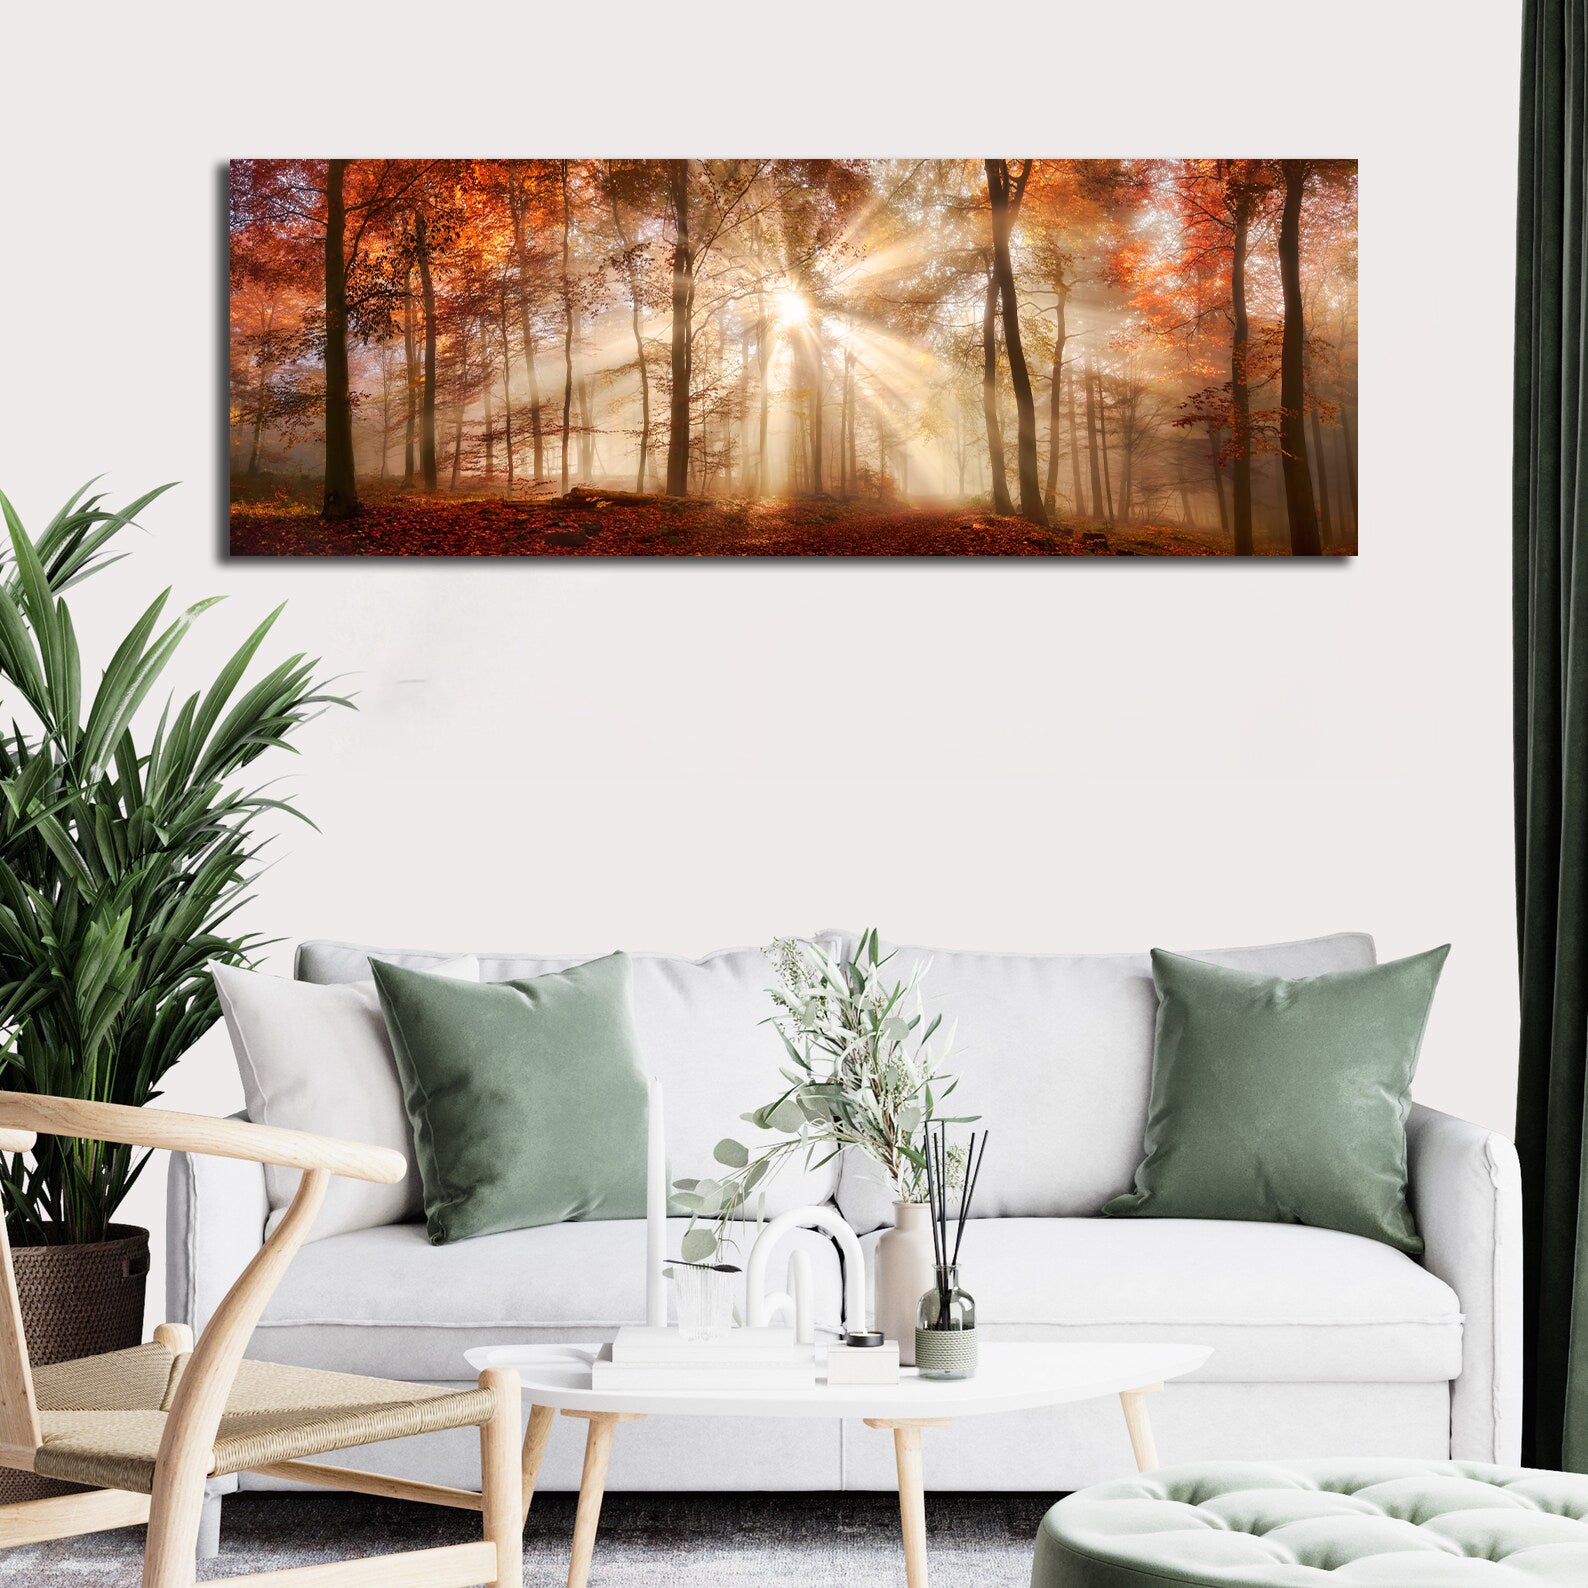 Framed 1 Panel - Rays of Sunlight in a Misty Autumn Forest